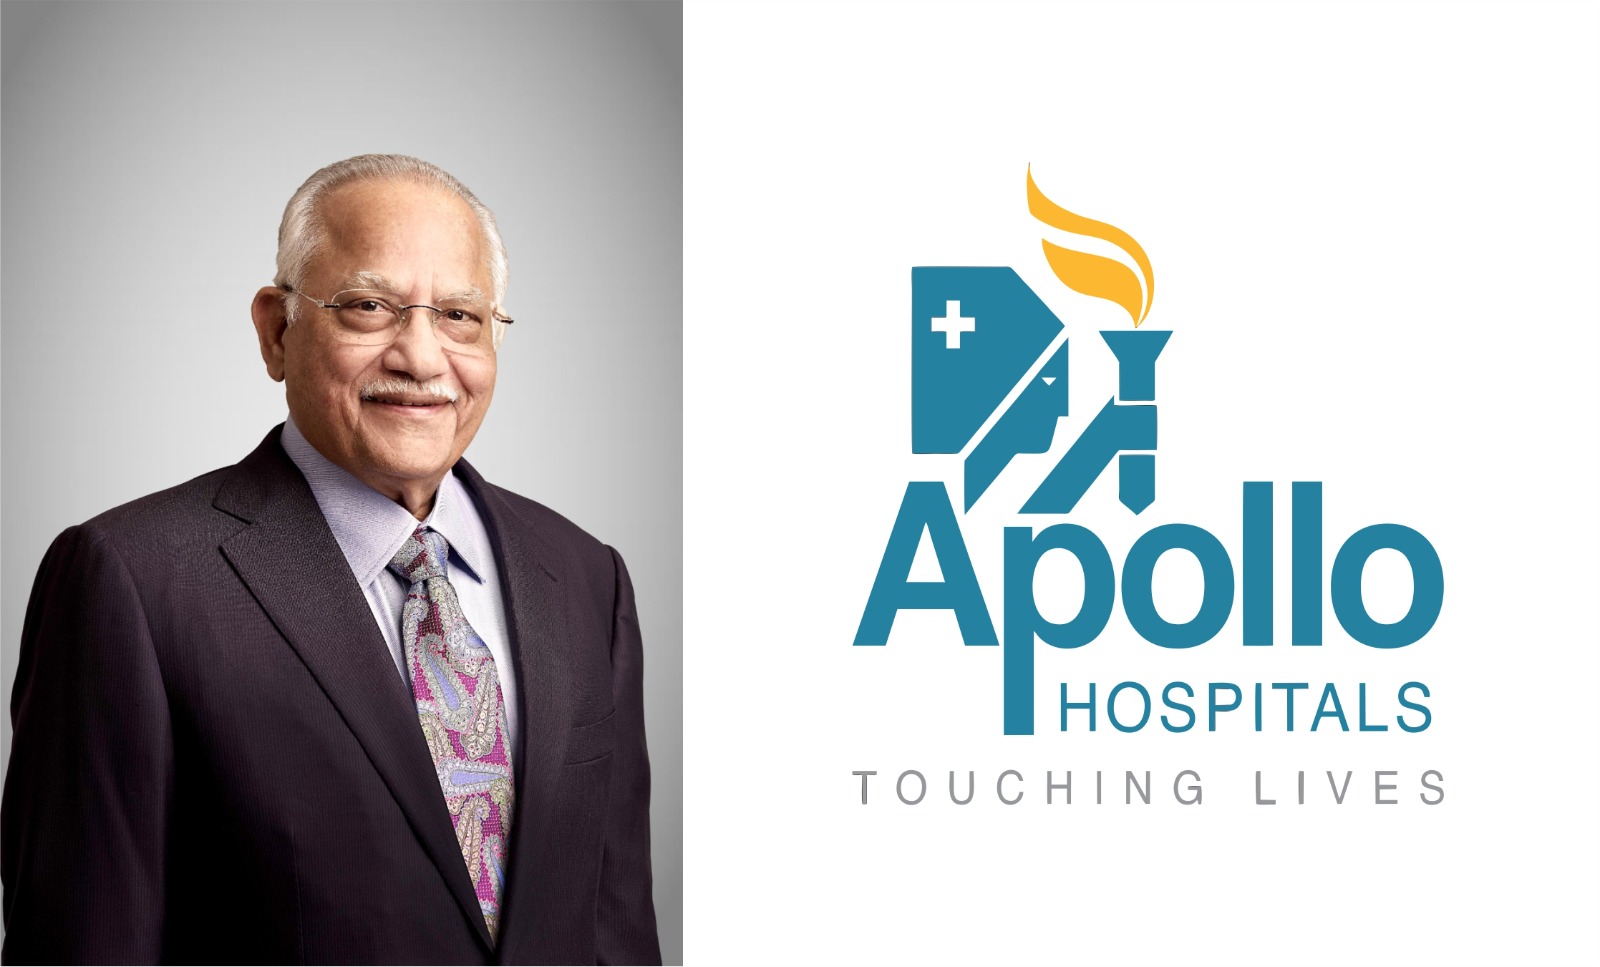 Apollo Hospitals announces the launch of a Comprehensive State-of-the-Art Emergency Medical Center at Shree Ram Janmbhoomi Teerth Sthal, Ayodhya